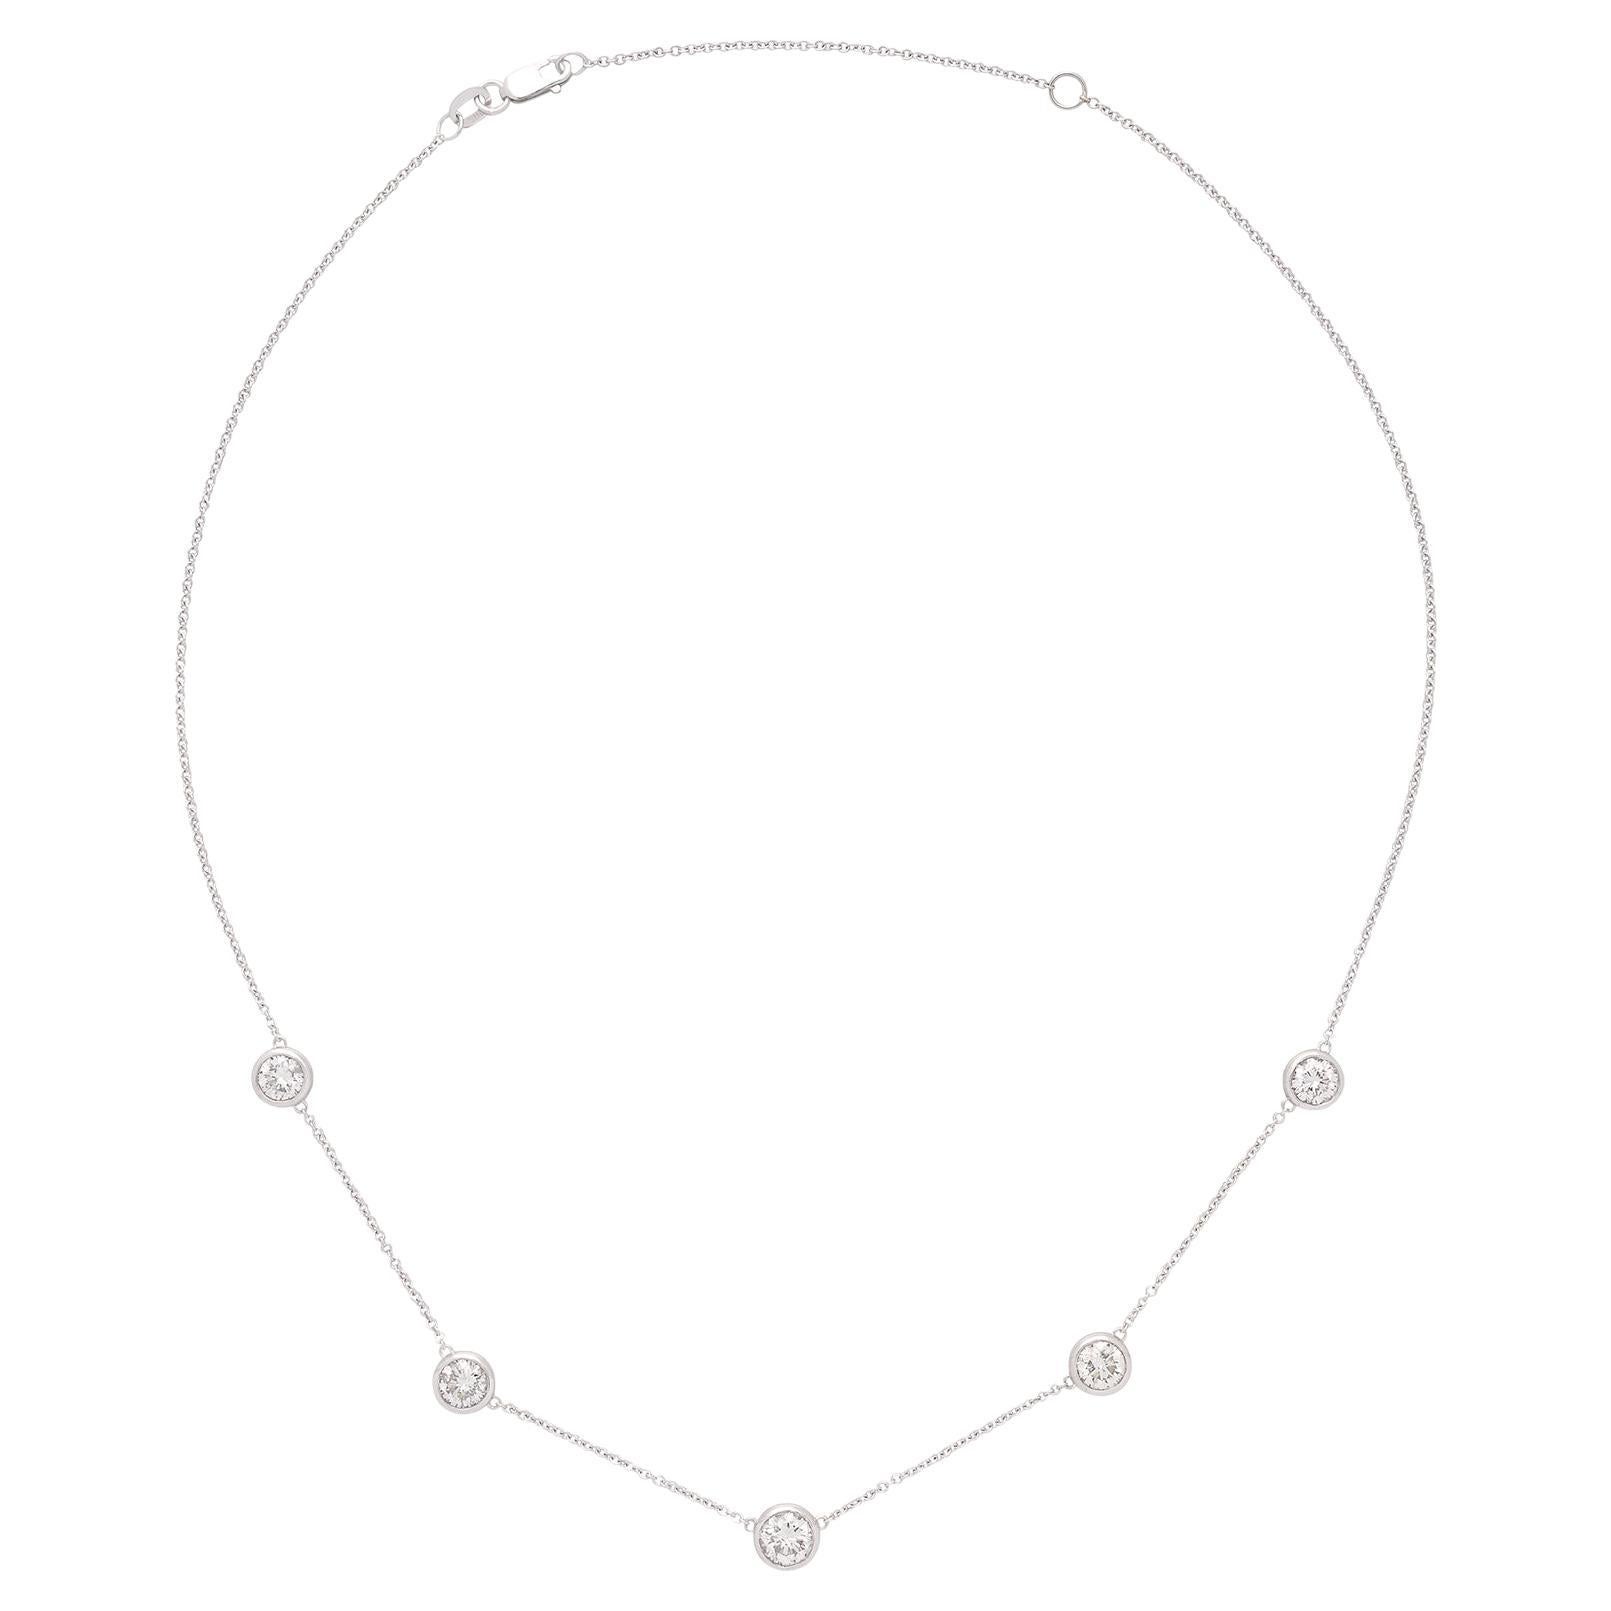 Phenomenal 3.01ct 18kt White Gold Diamonds by the Yard Necklace For ...